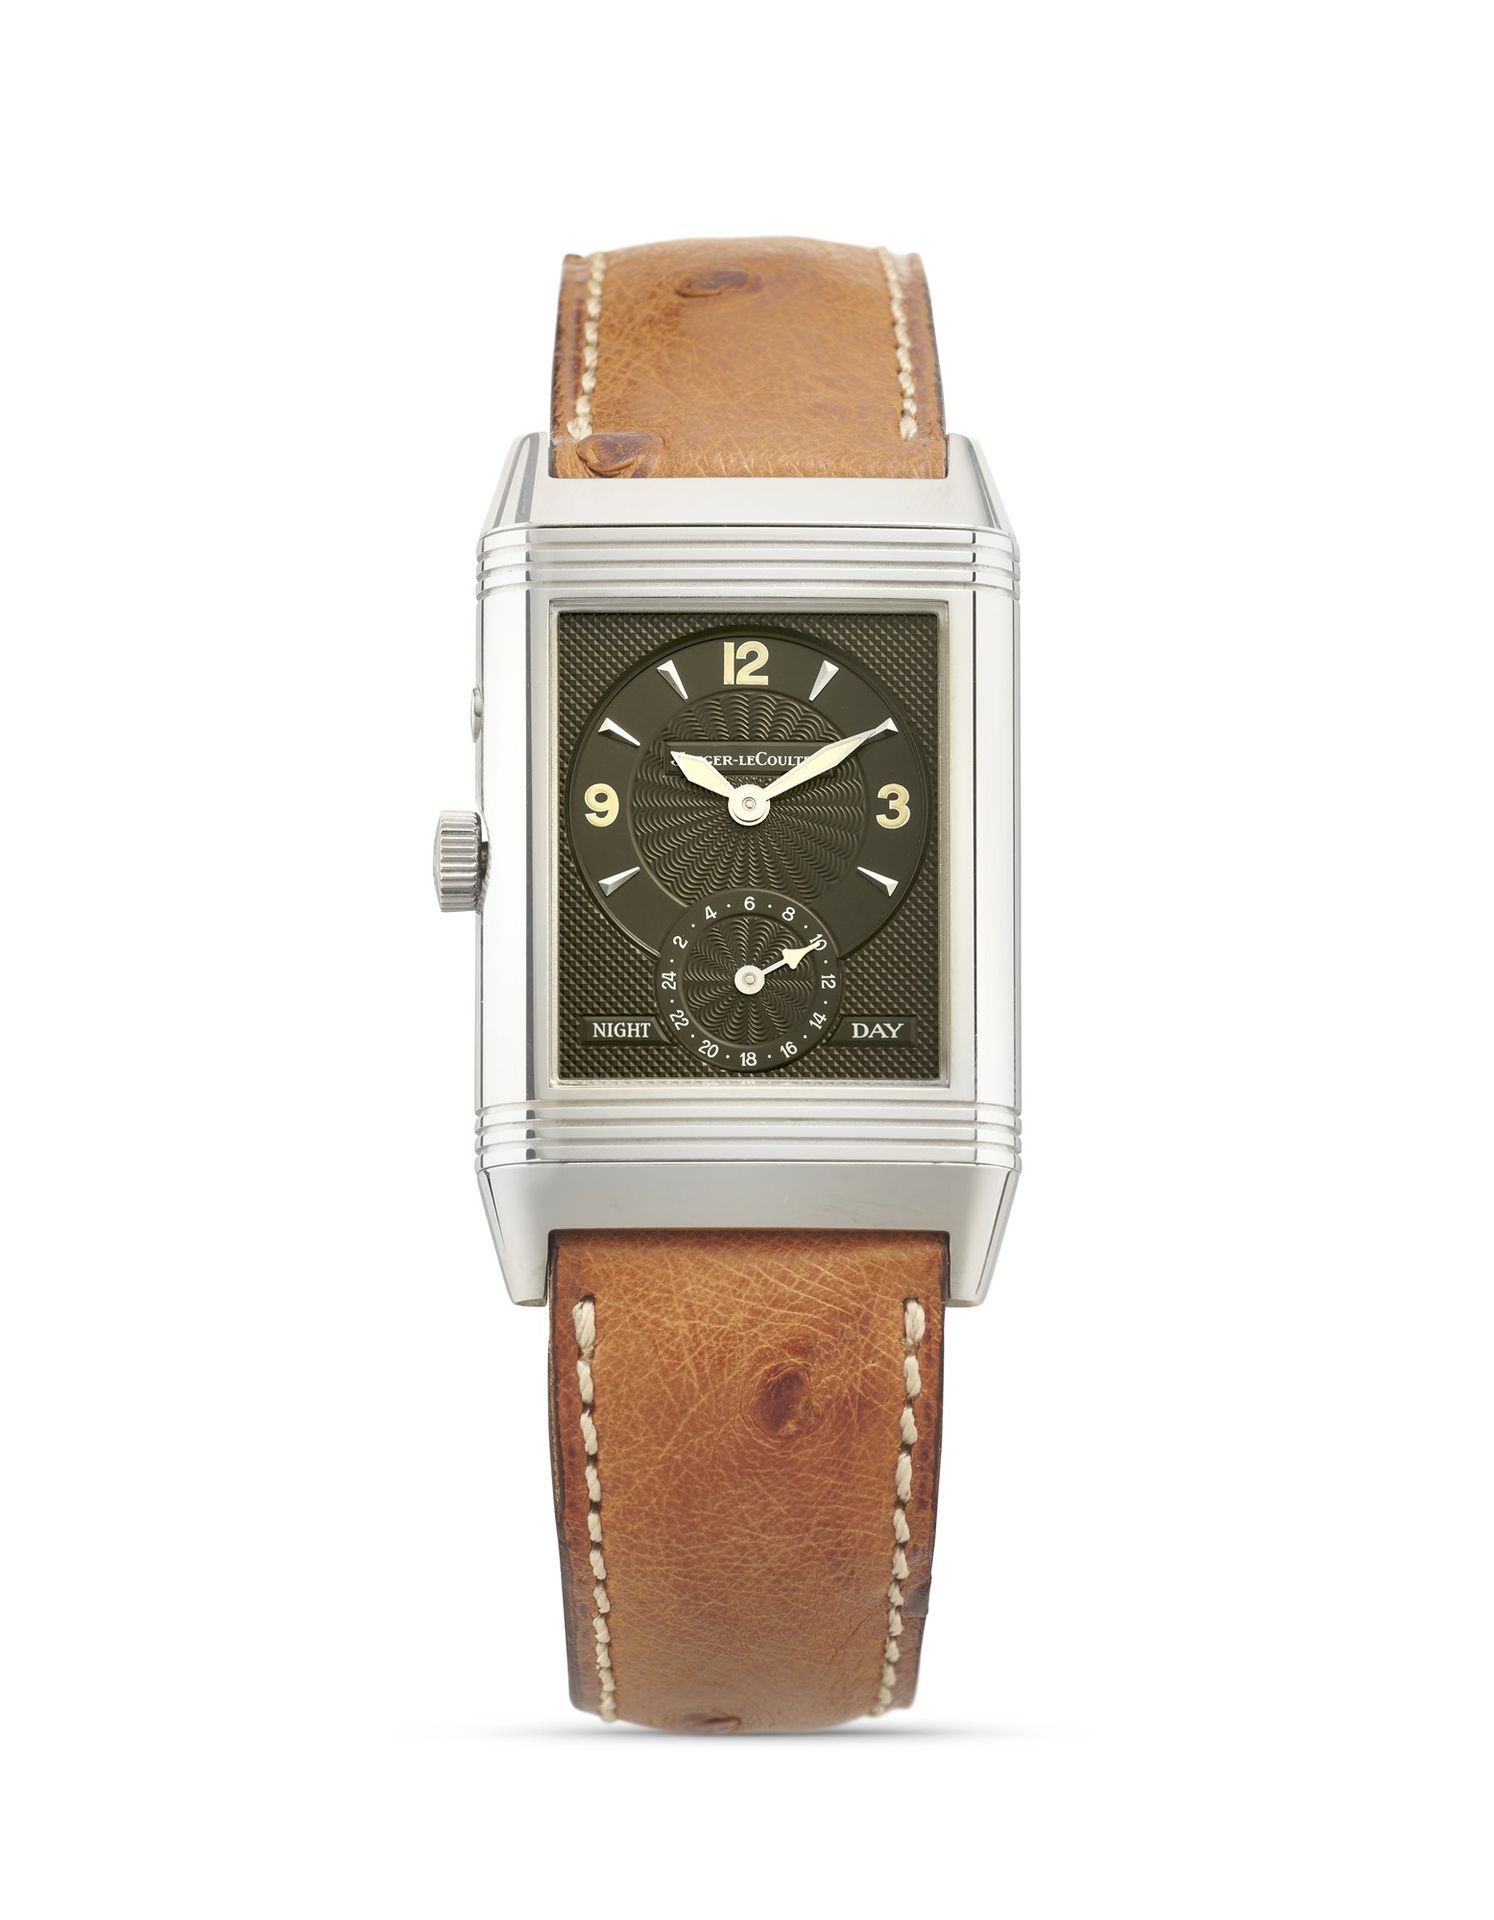 Jaeger-LeCoultre Jaeger-LeCoultre Reverso Duoface Night & Day 270854, 90s

Stain&hellip;